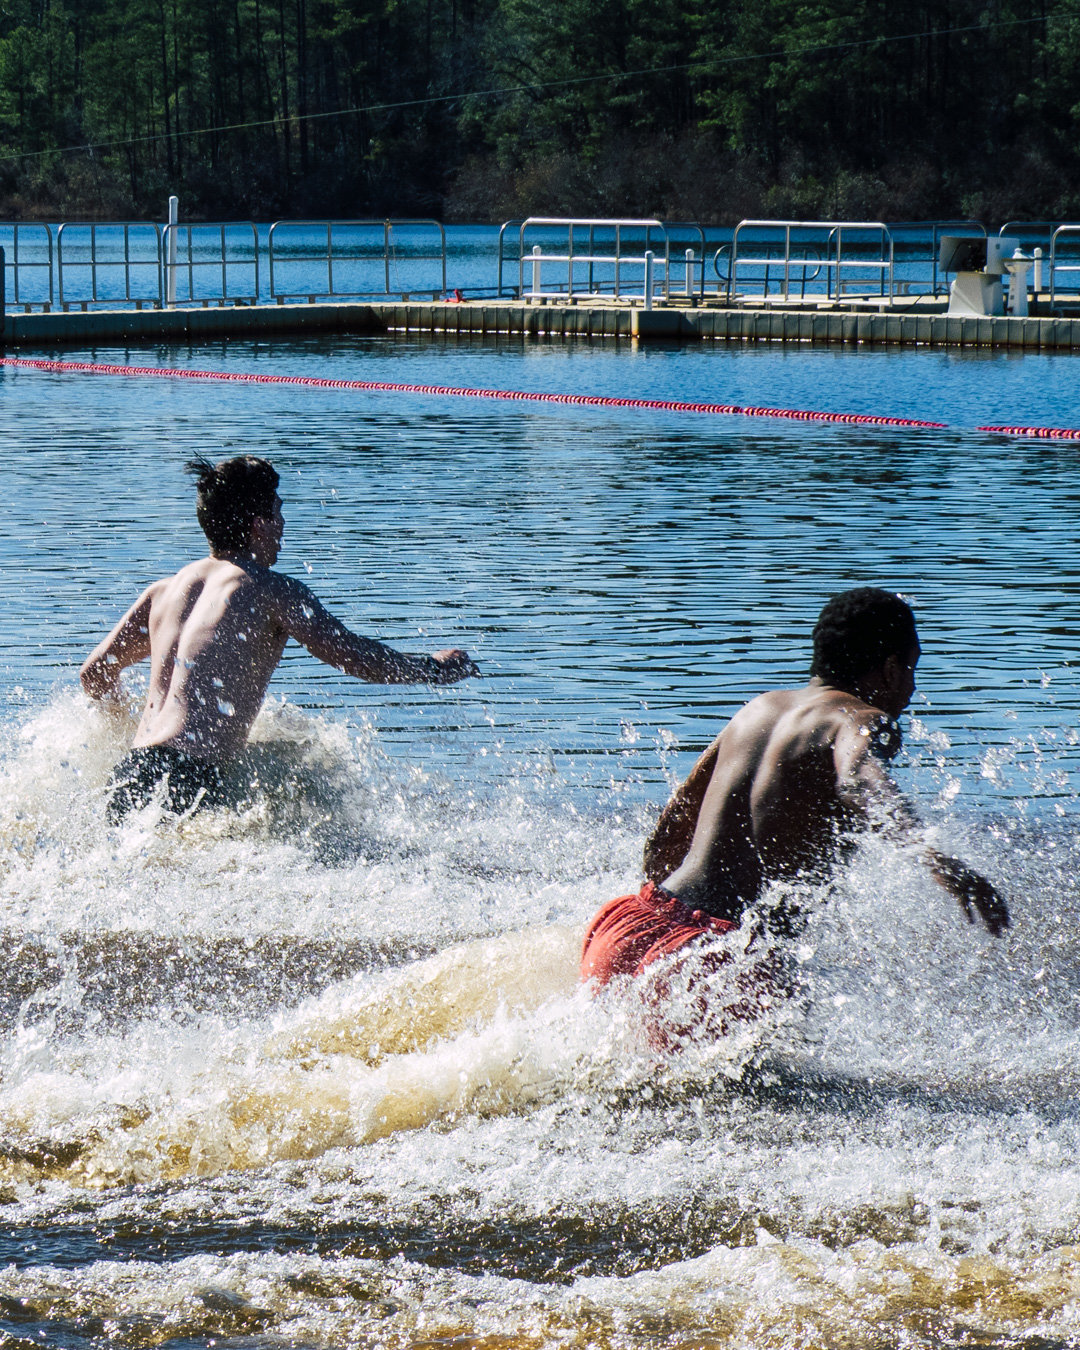 The annual Fort Bragg Polar Bear Plunge was held on Jan. 28 at Smith Lake. 